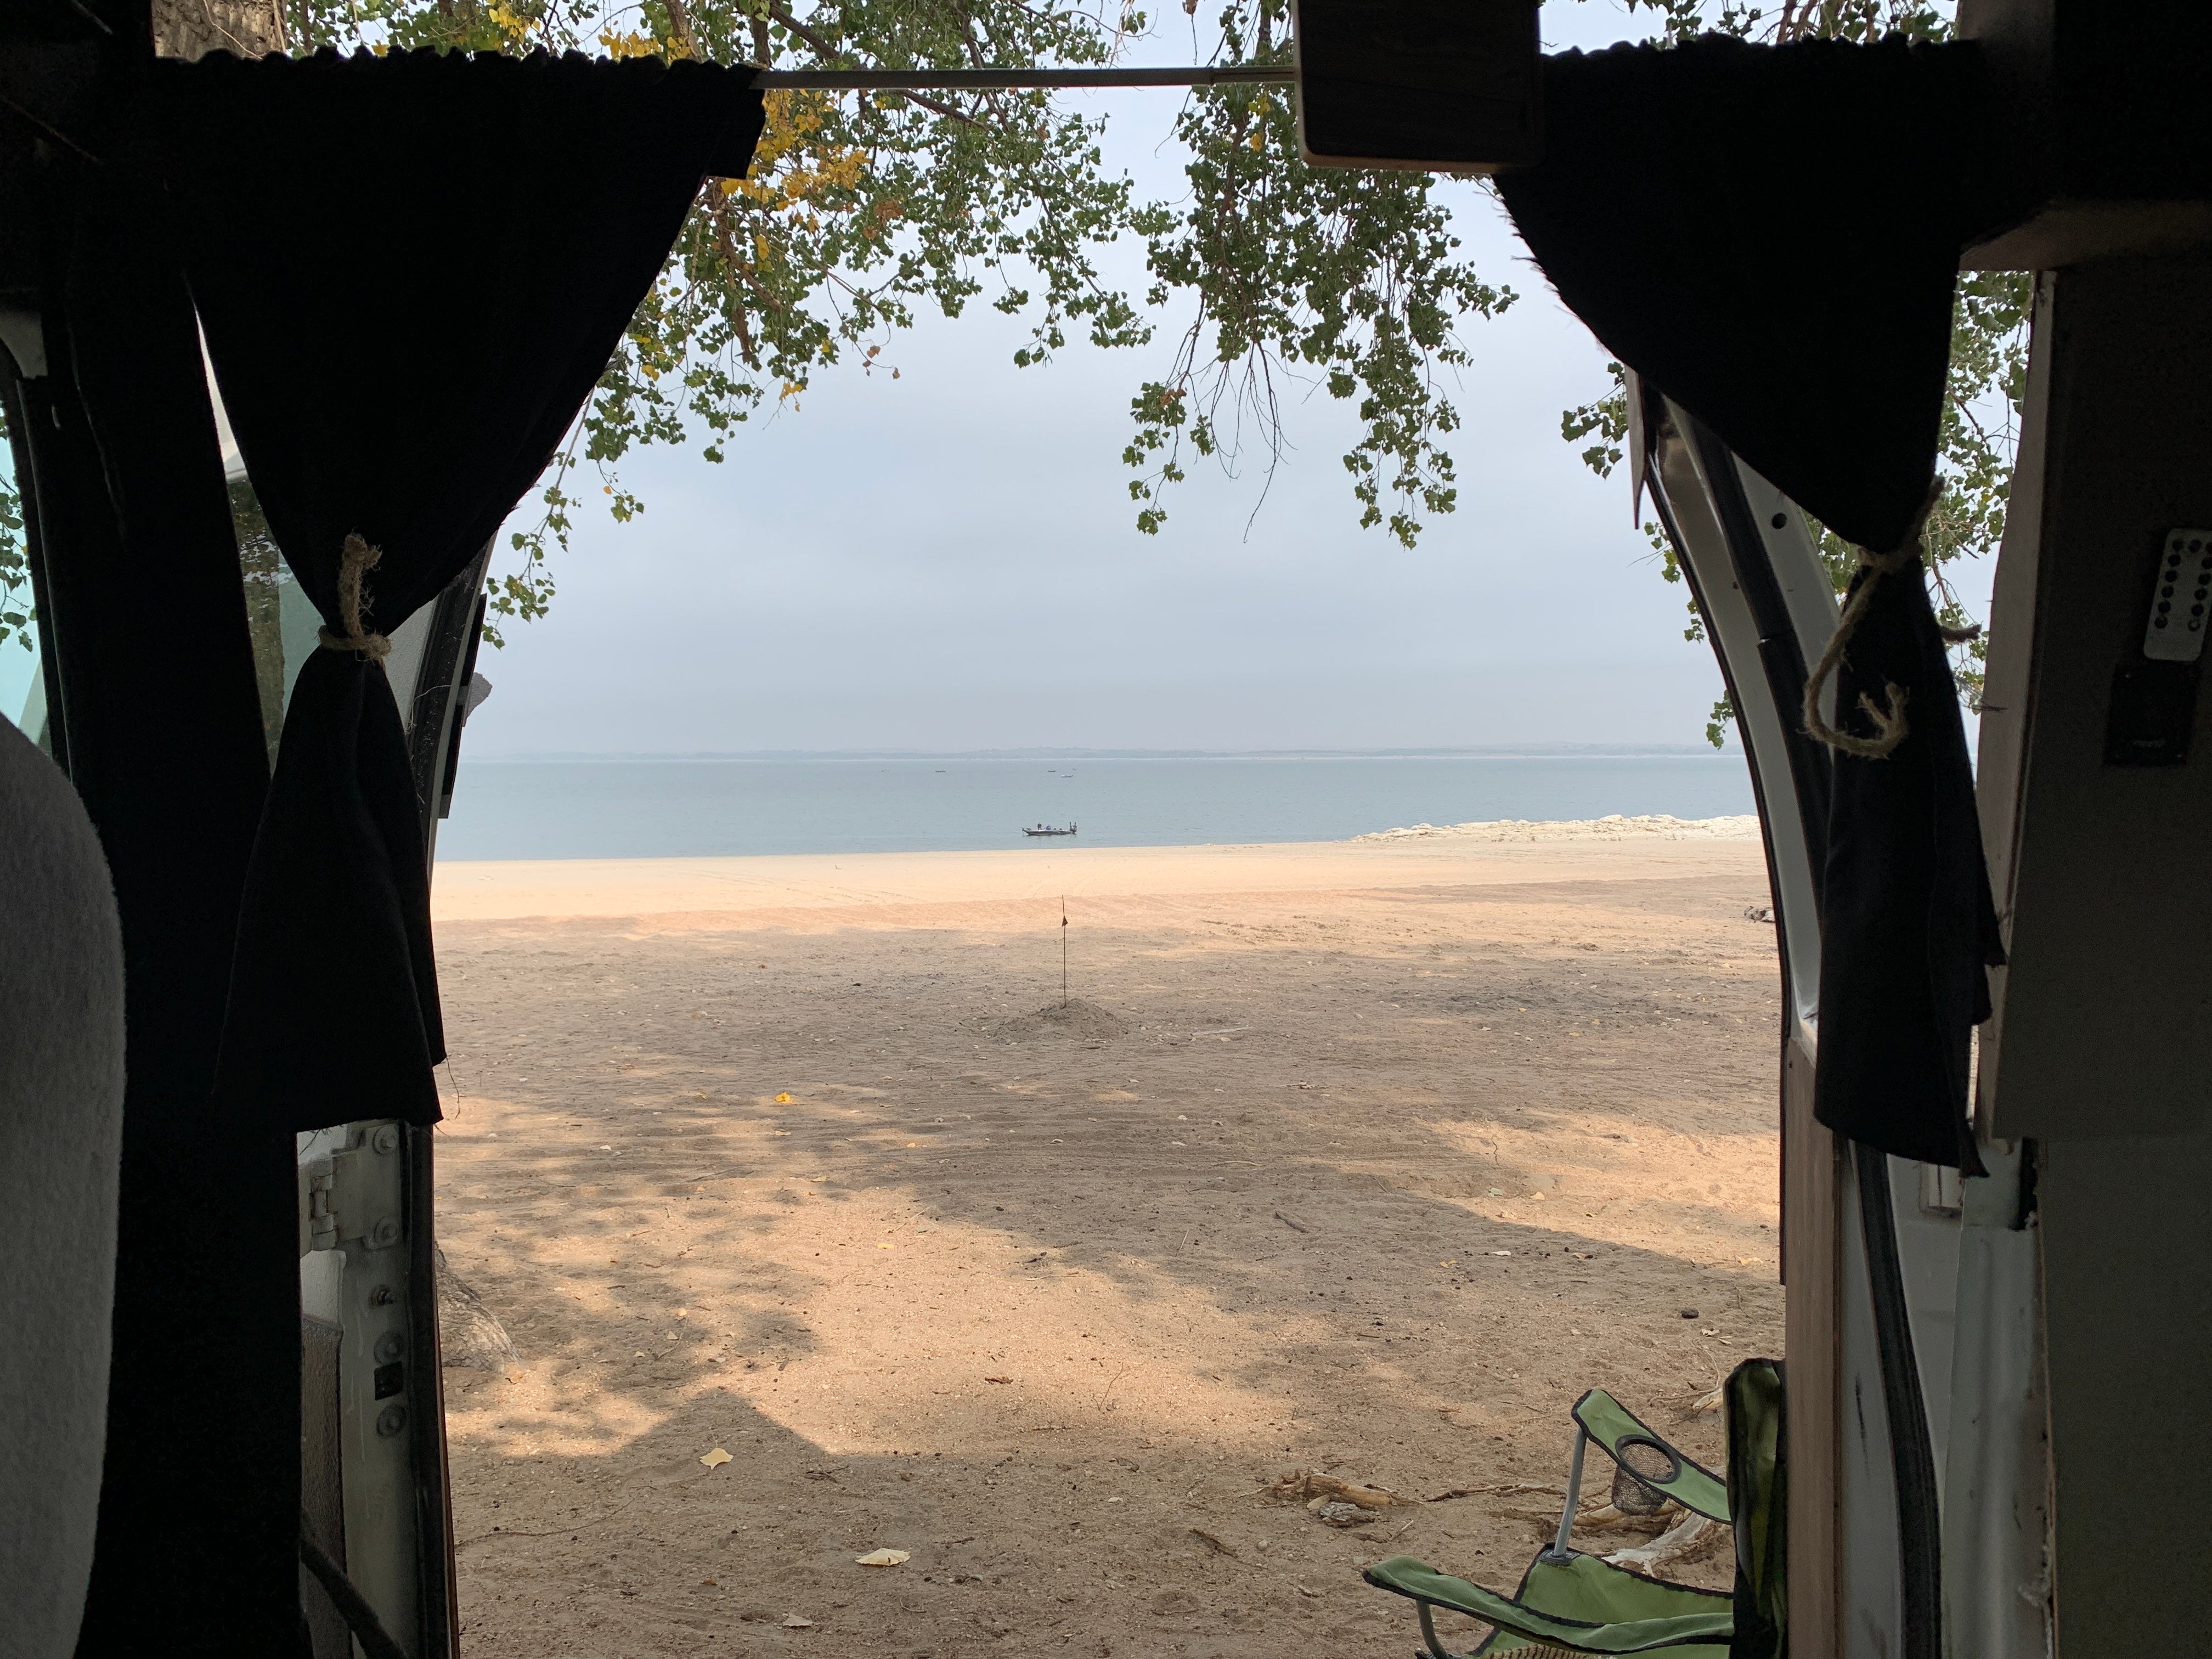 Camper submitted image from Ogallala Beach - 4